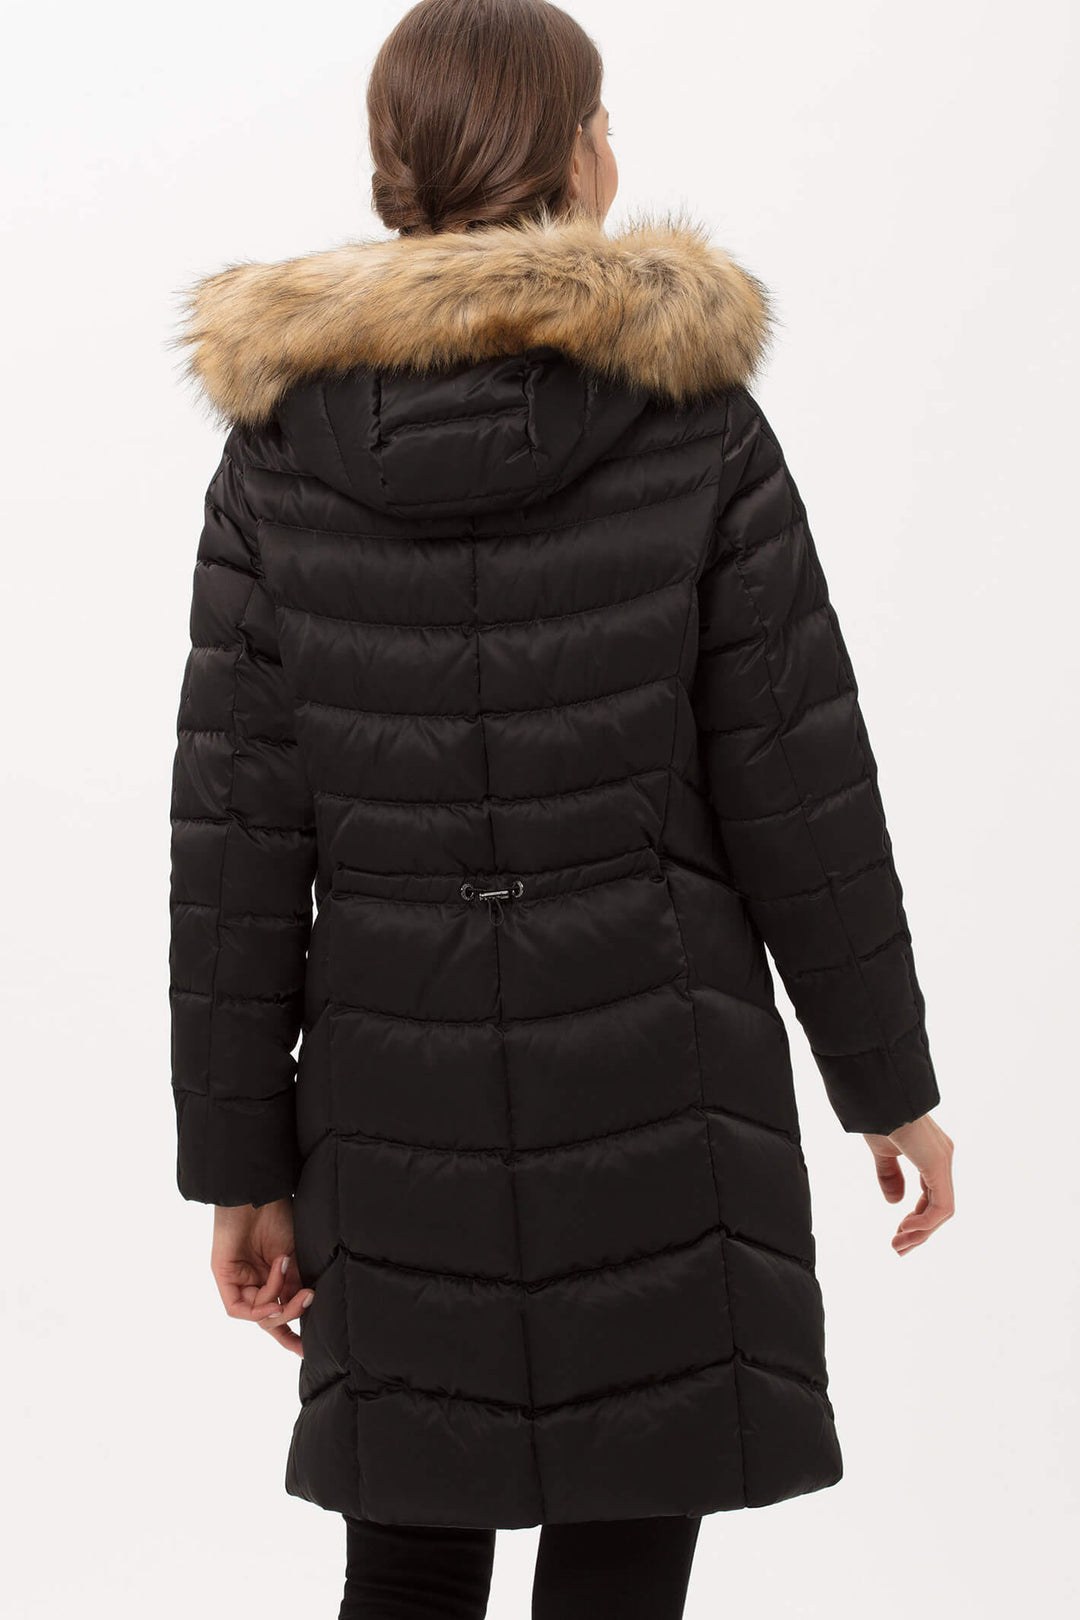 Brax Montreal 93-6337 02 Black Feel Good Coat With Faux Fur Hood - Shirley Allum Boutique